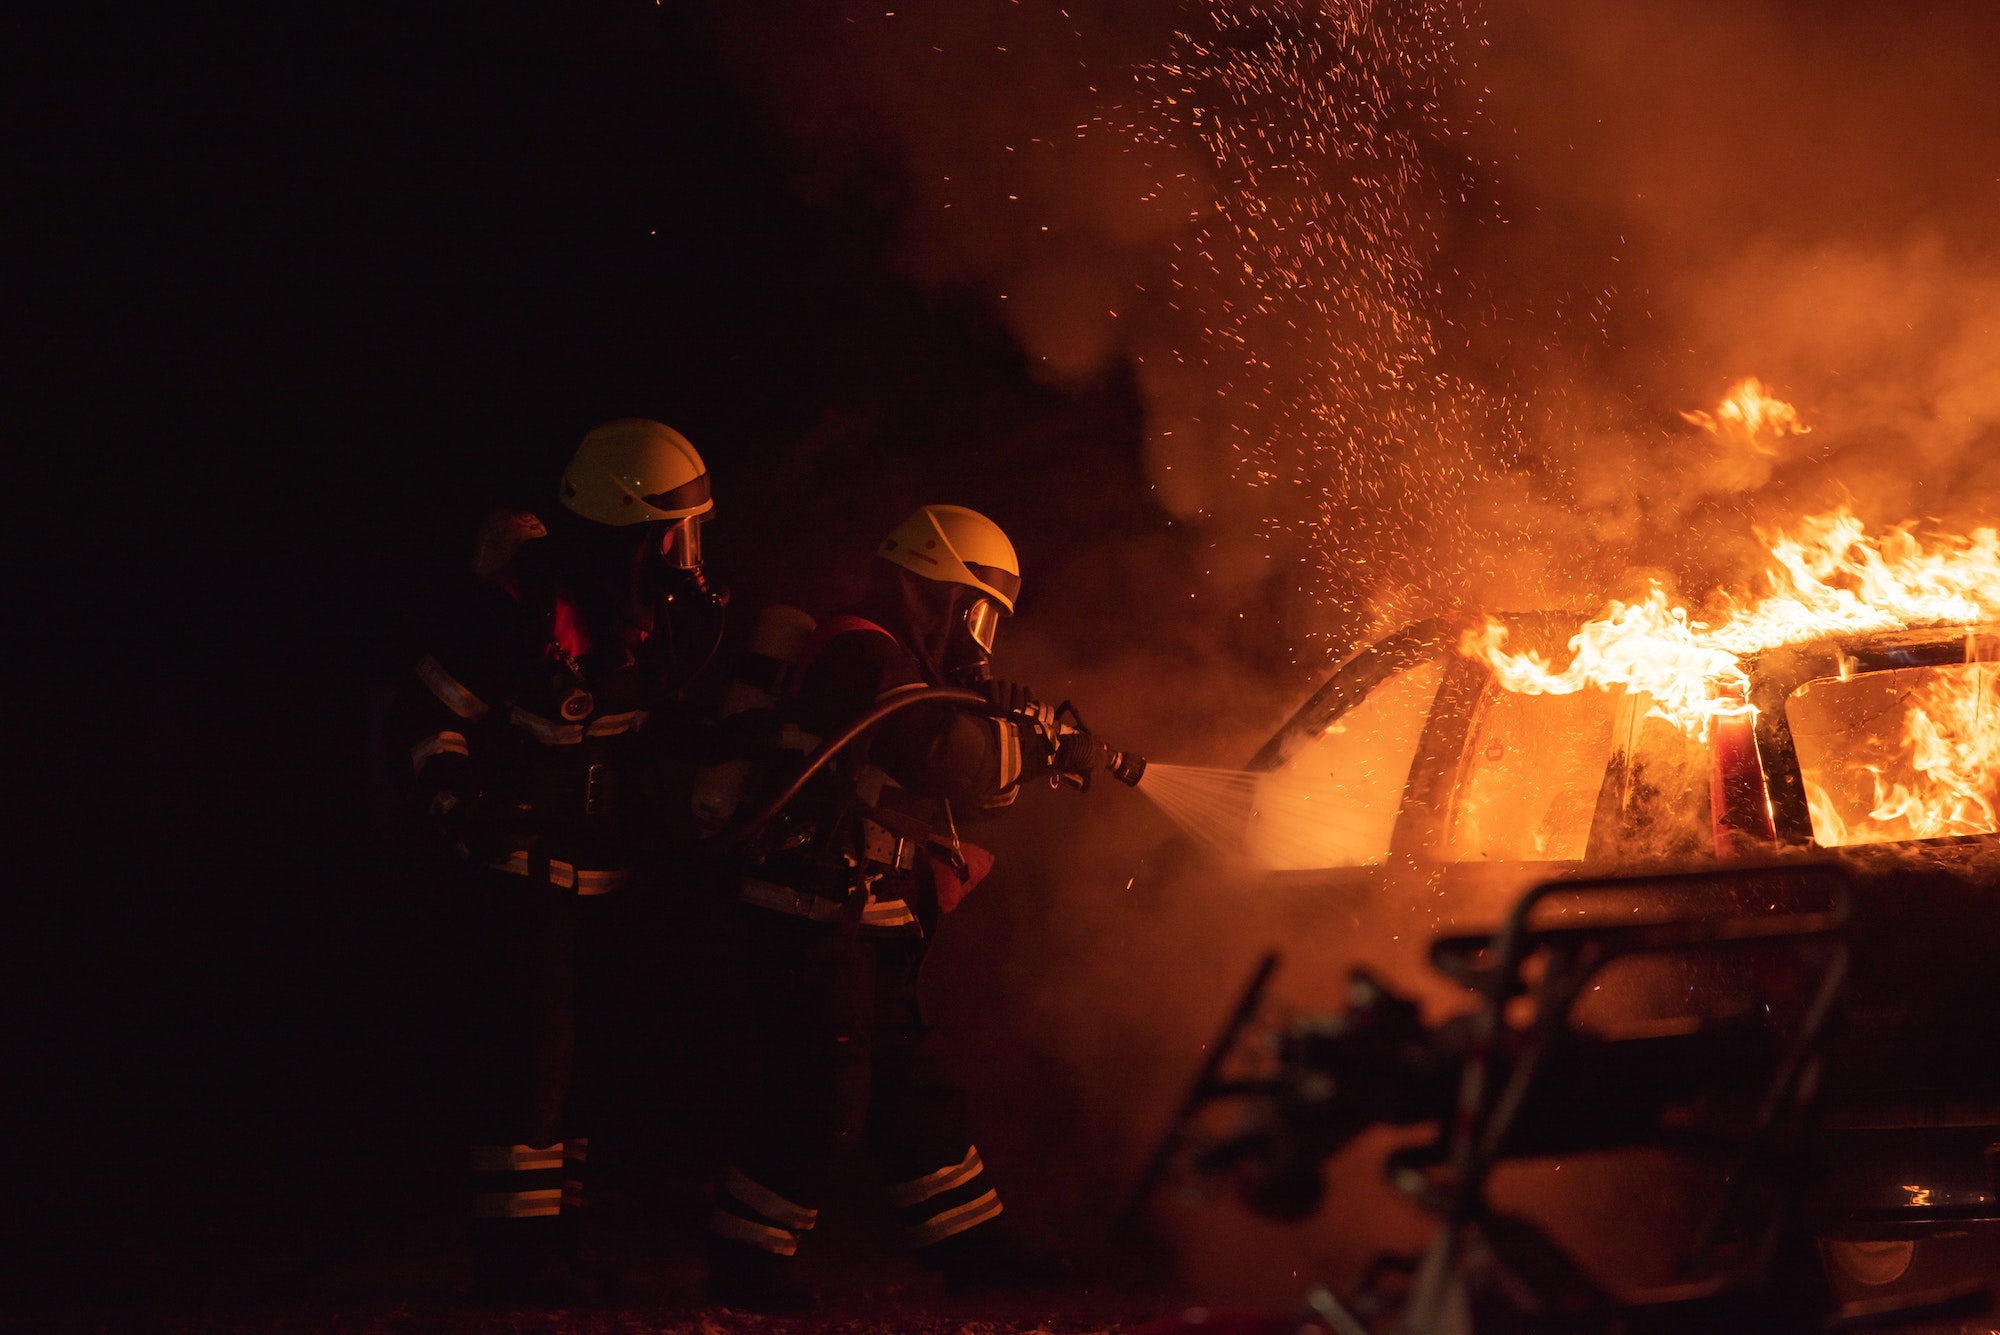 Electric vehicle fires are rare, but challenging to extinguish